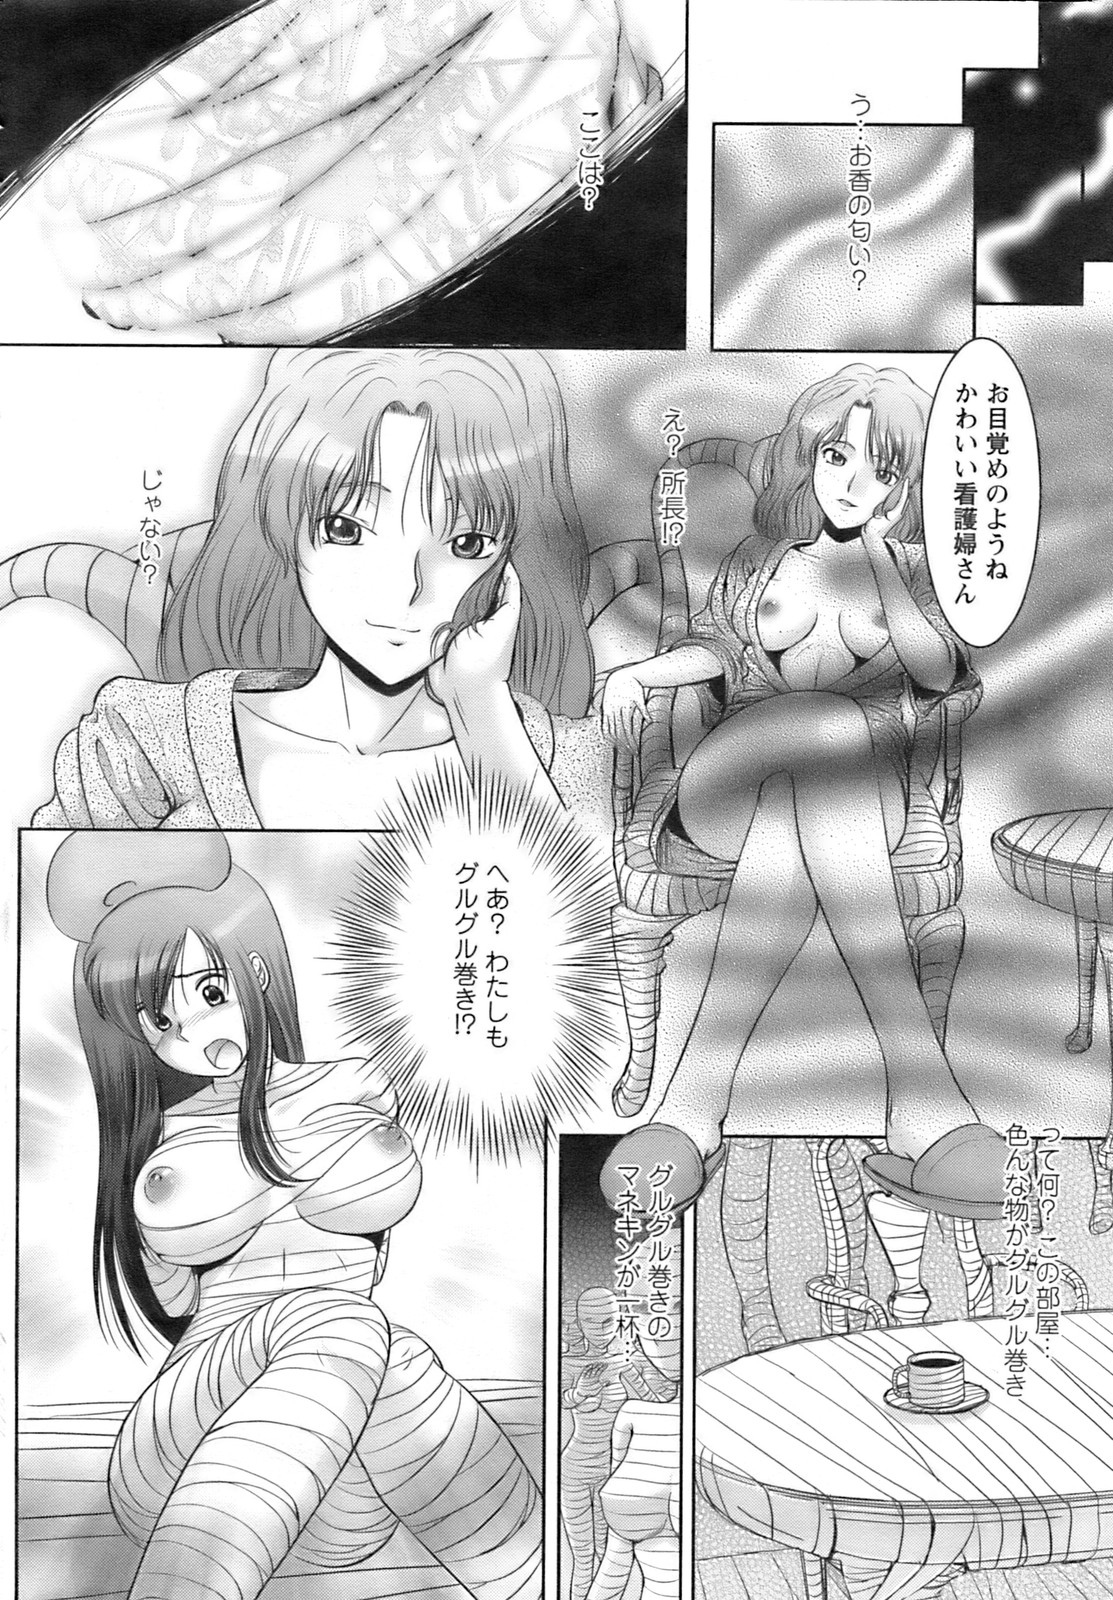 Action Pizazz 2008-09 page 31 full